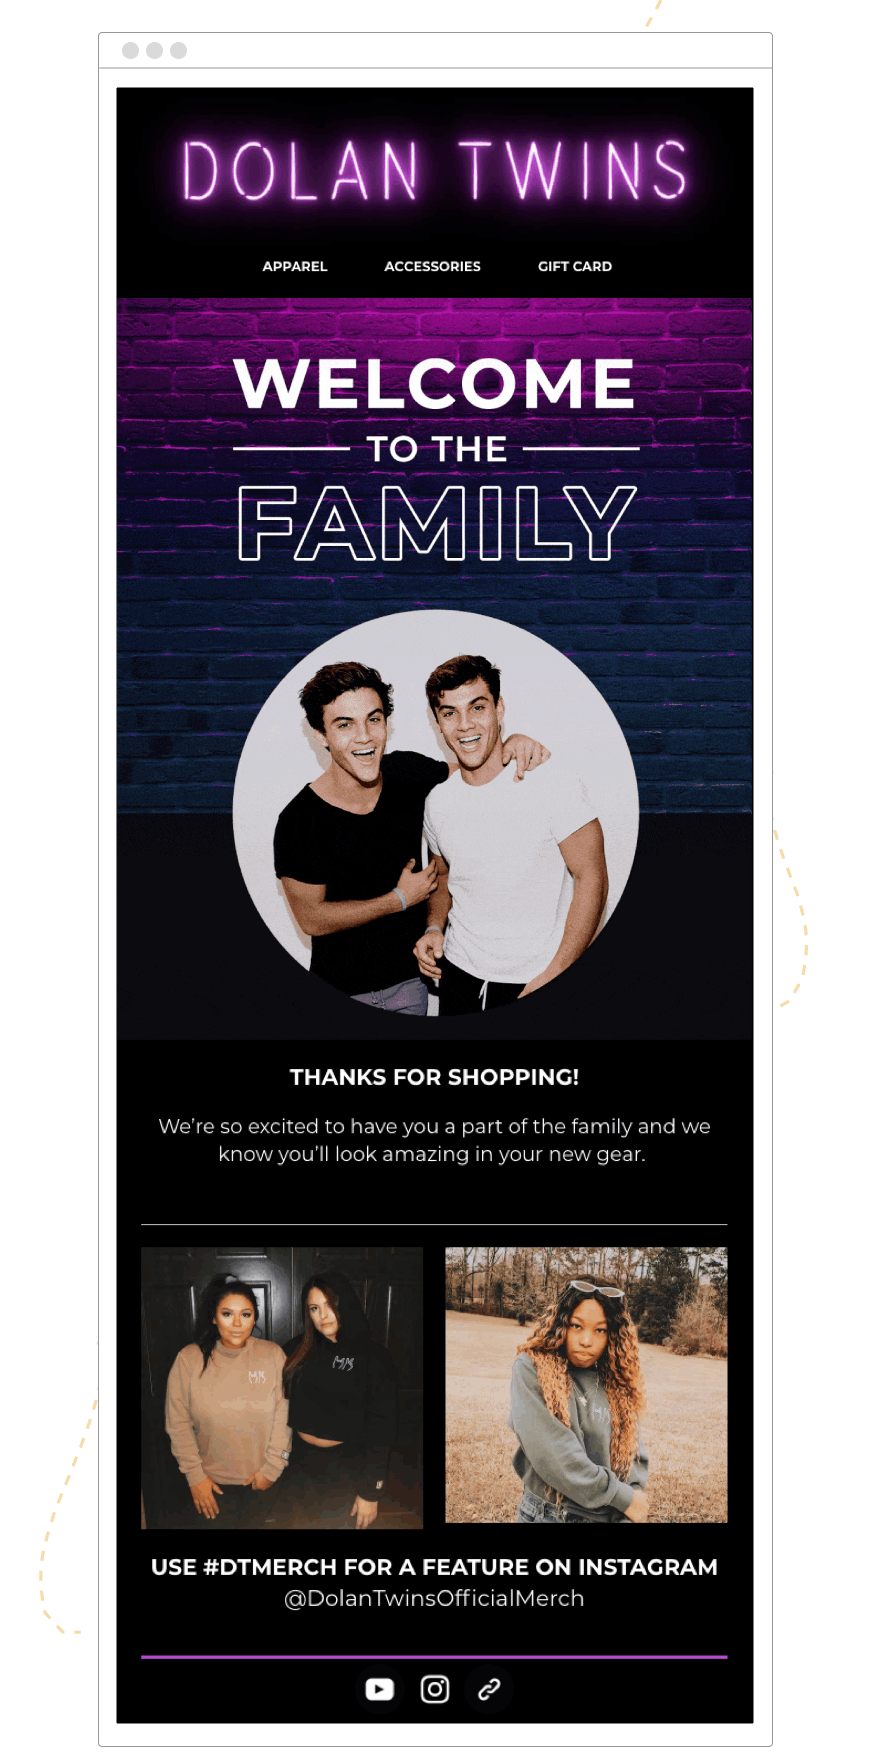 Hive.co_Email_Marketing_CRM_New_Customer_Thank_You_Dolan_Twins_Template